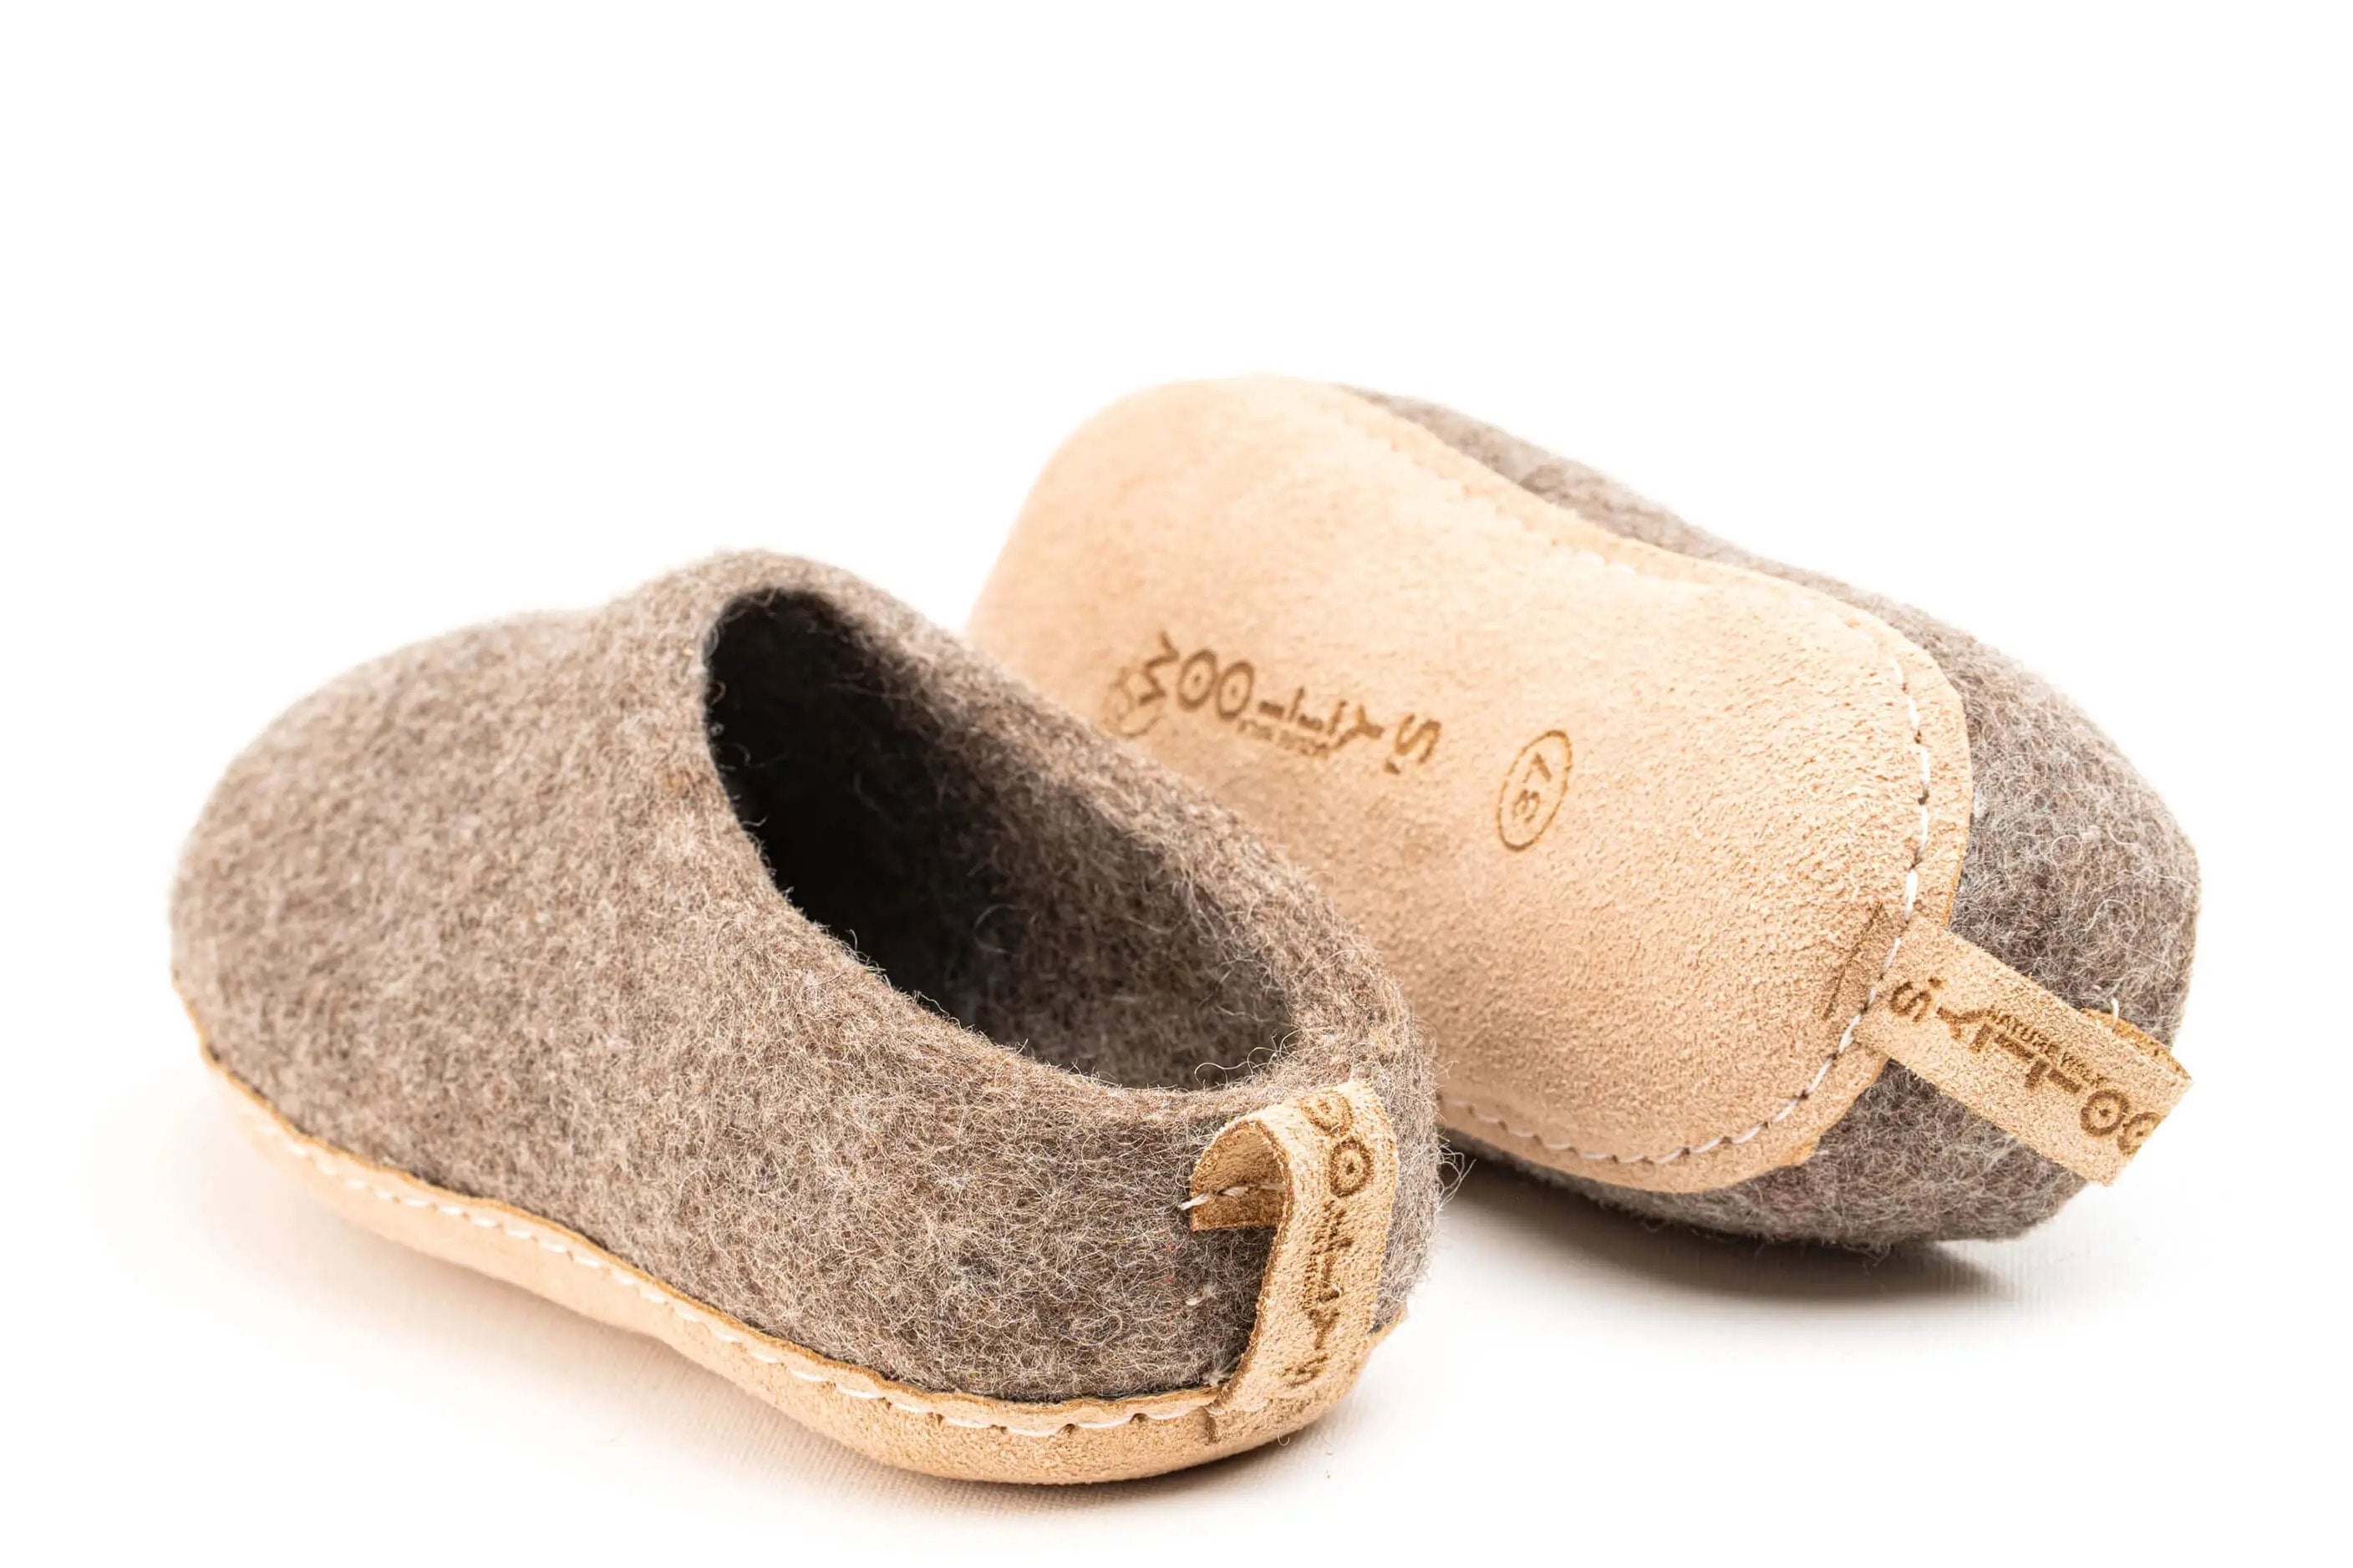 Indoor Open Heel Slippers With Leather Sole - Natural Brown